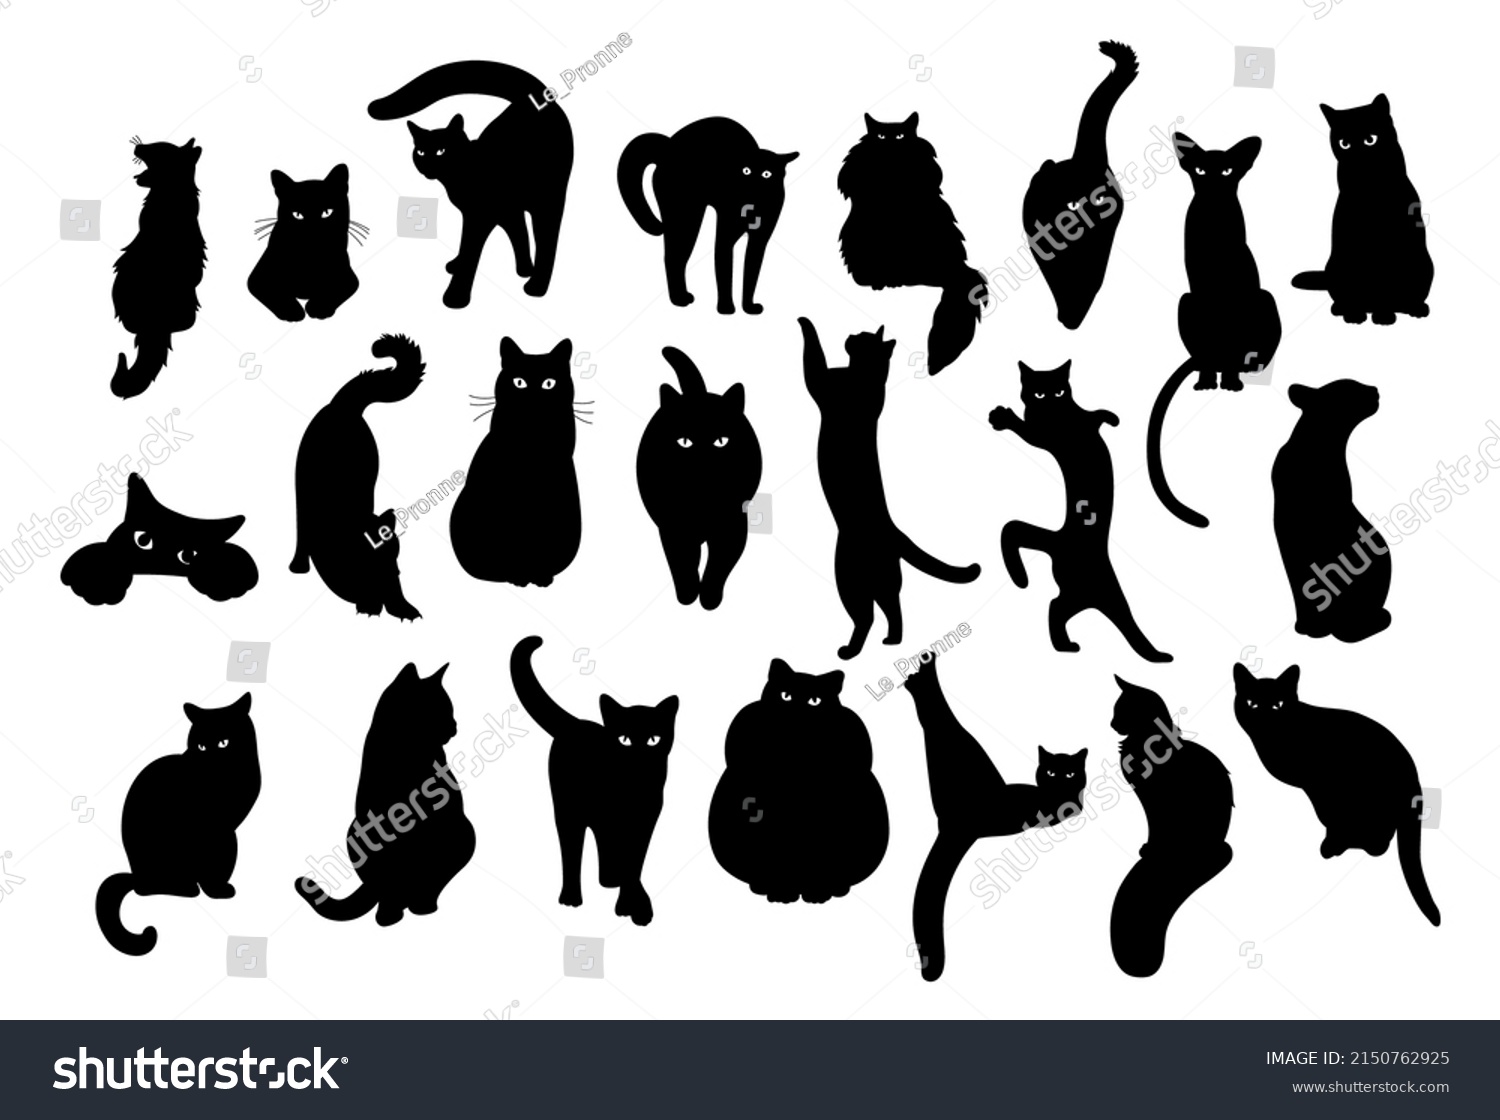 SVG of Cat different poses silhouette isolated. Template for plotter lazer cutting of paper, wood. svg